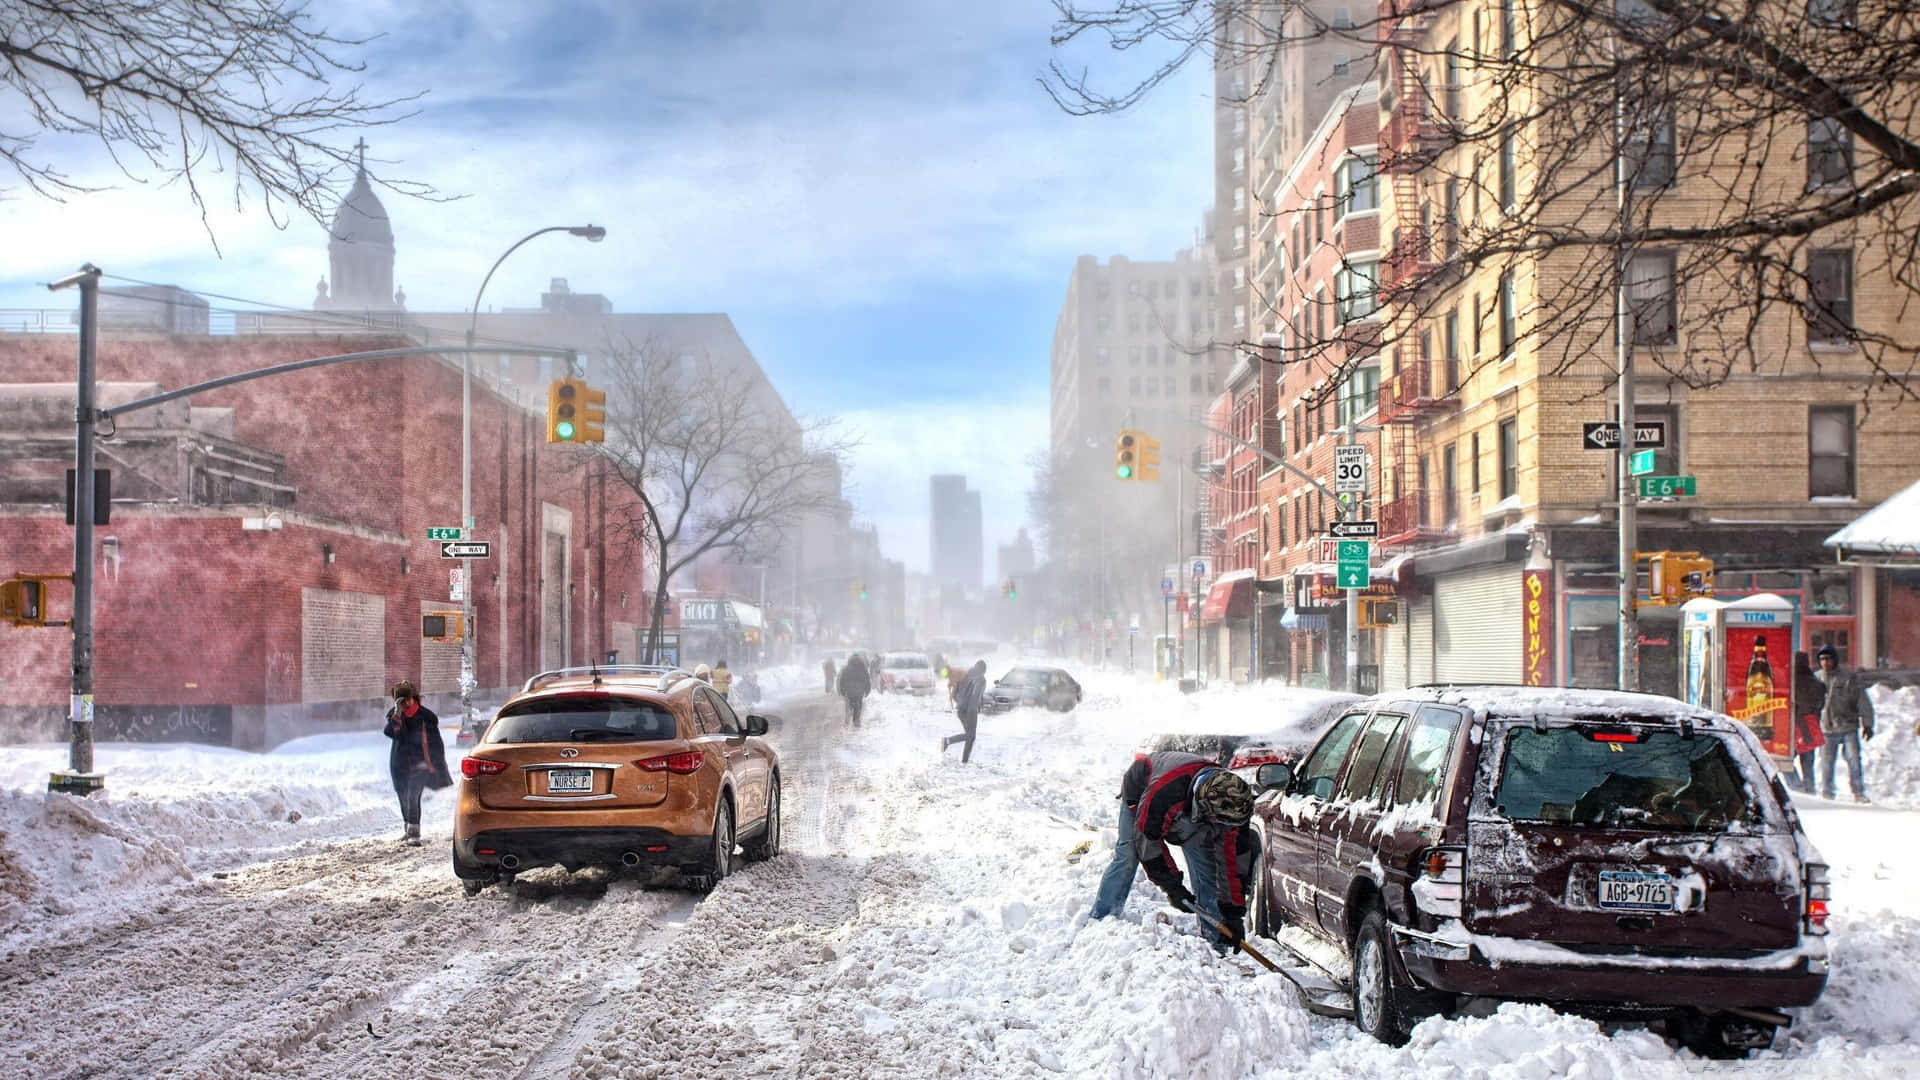 Mesmerizing Winter Wonderland In The Heart Of The City Wallpaper